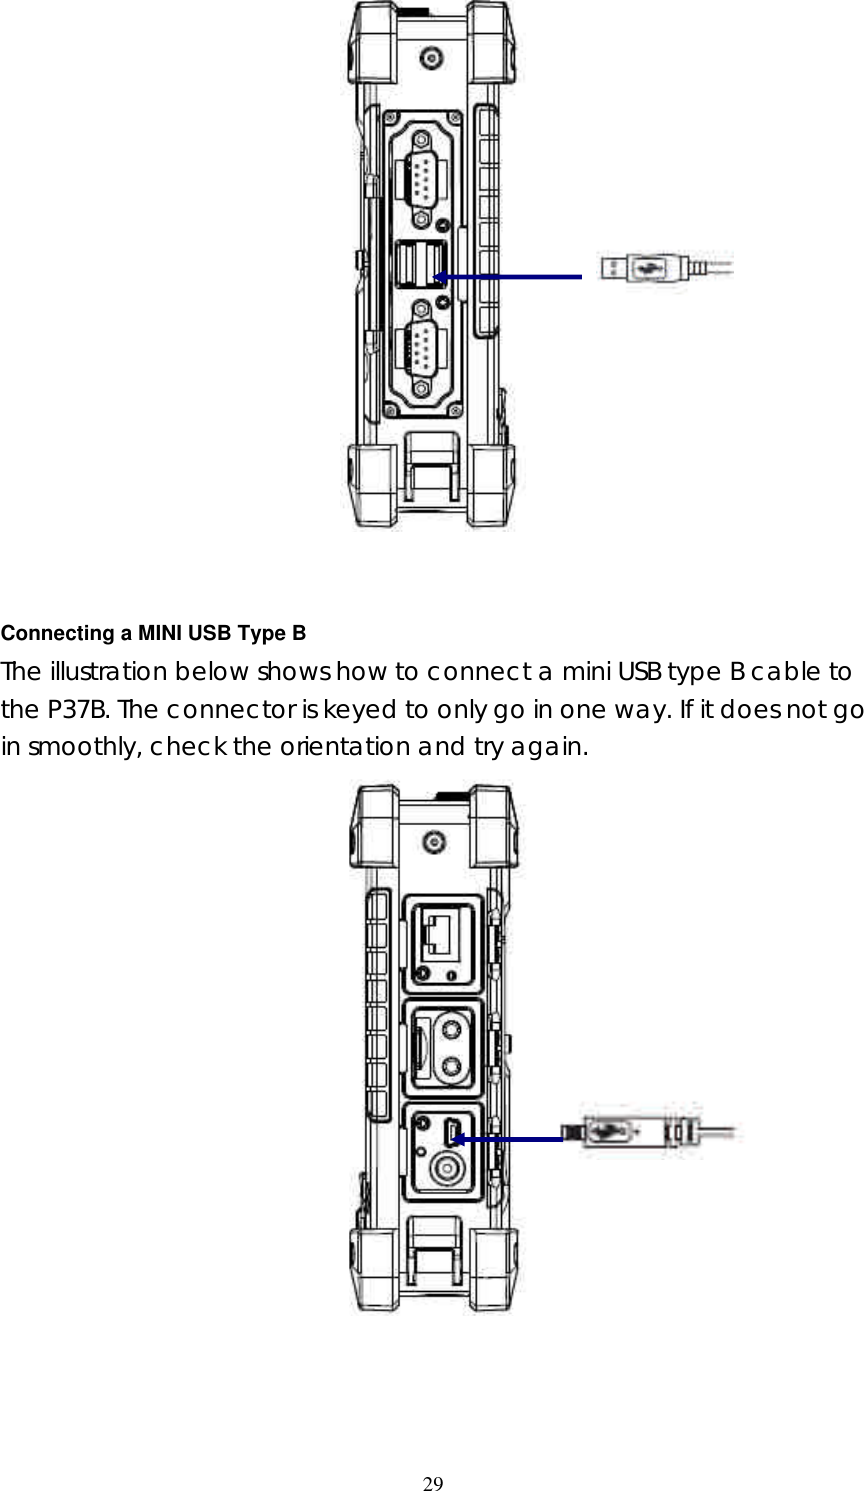  29   Connecting a MINI USB Type B The illustration below shows how to connect a mini USB type B cable to the P37B. The connector is keyed to only go in one way. If it does not go in smoothly, check the orientation and try again.      